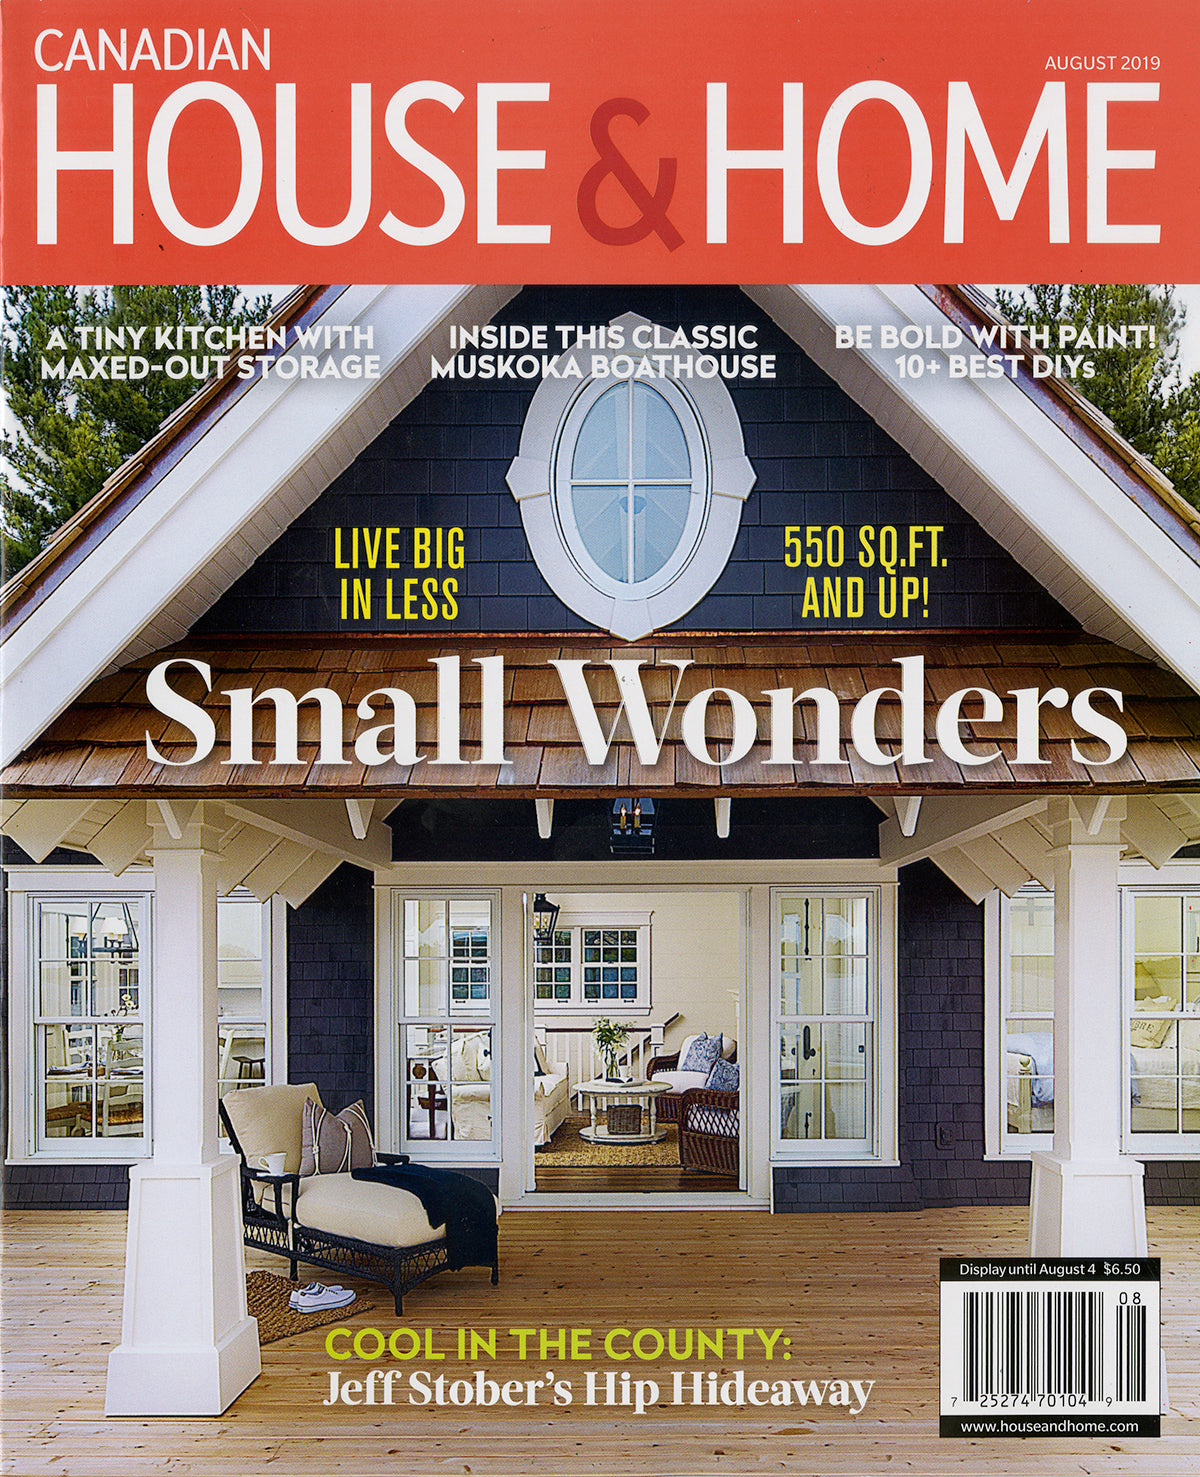 Canadian House & Home August Issue